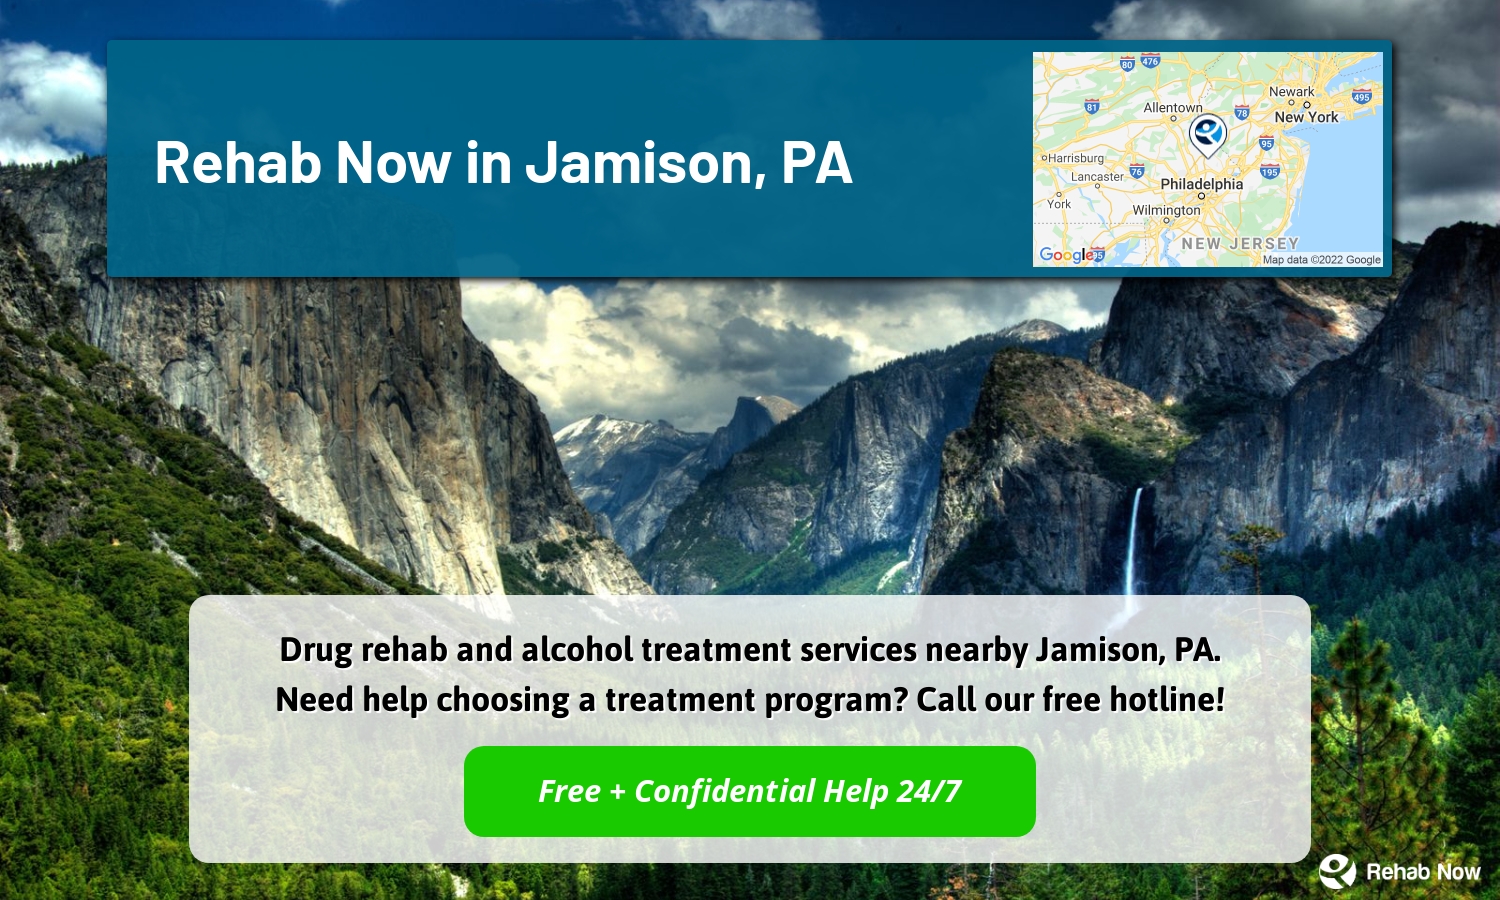 Drug rehab and alcohol treatment services nearby Jamison, PA. Need help choosing a treatment program? Call our free hotline!